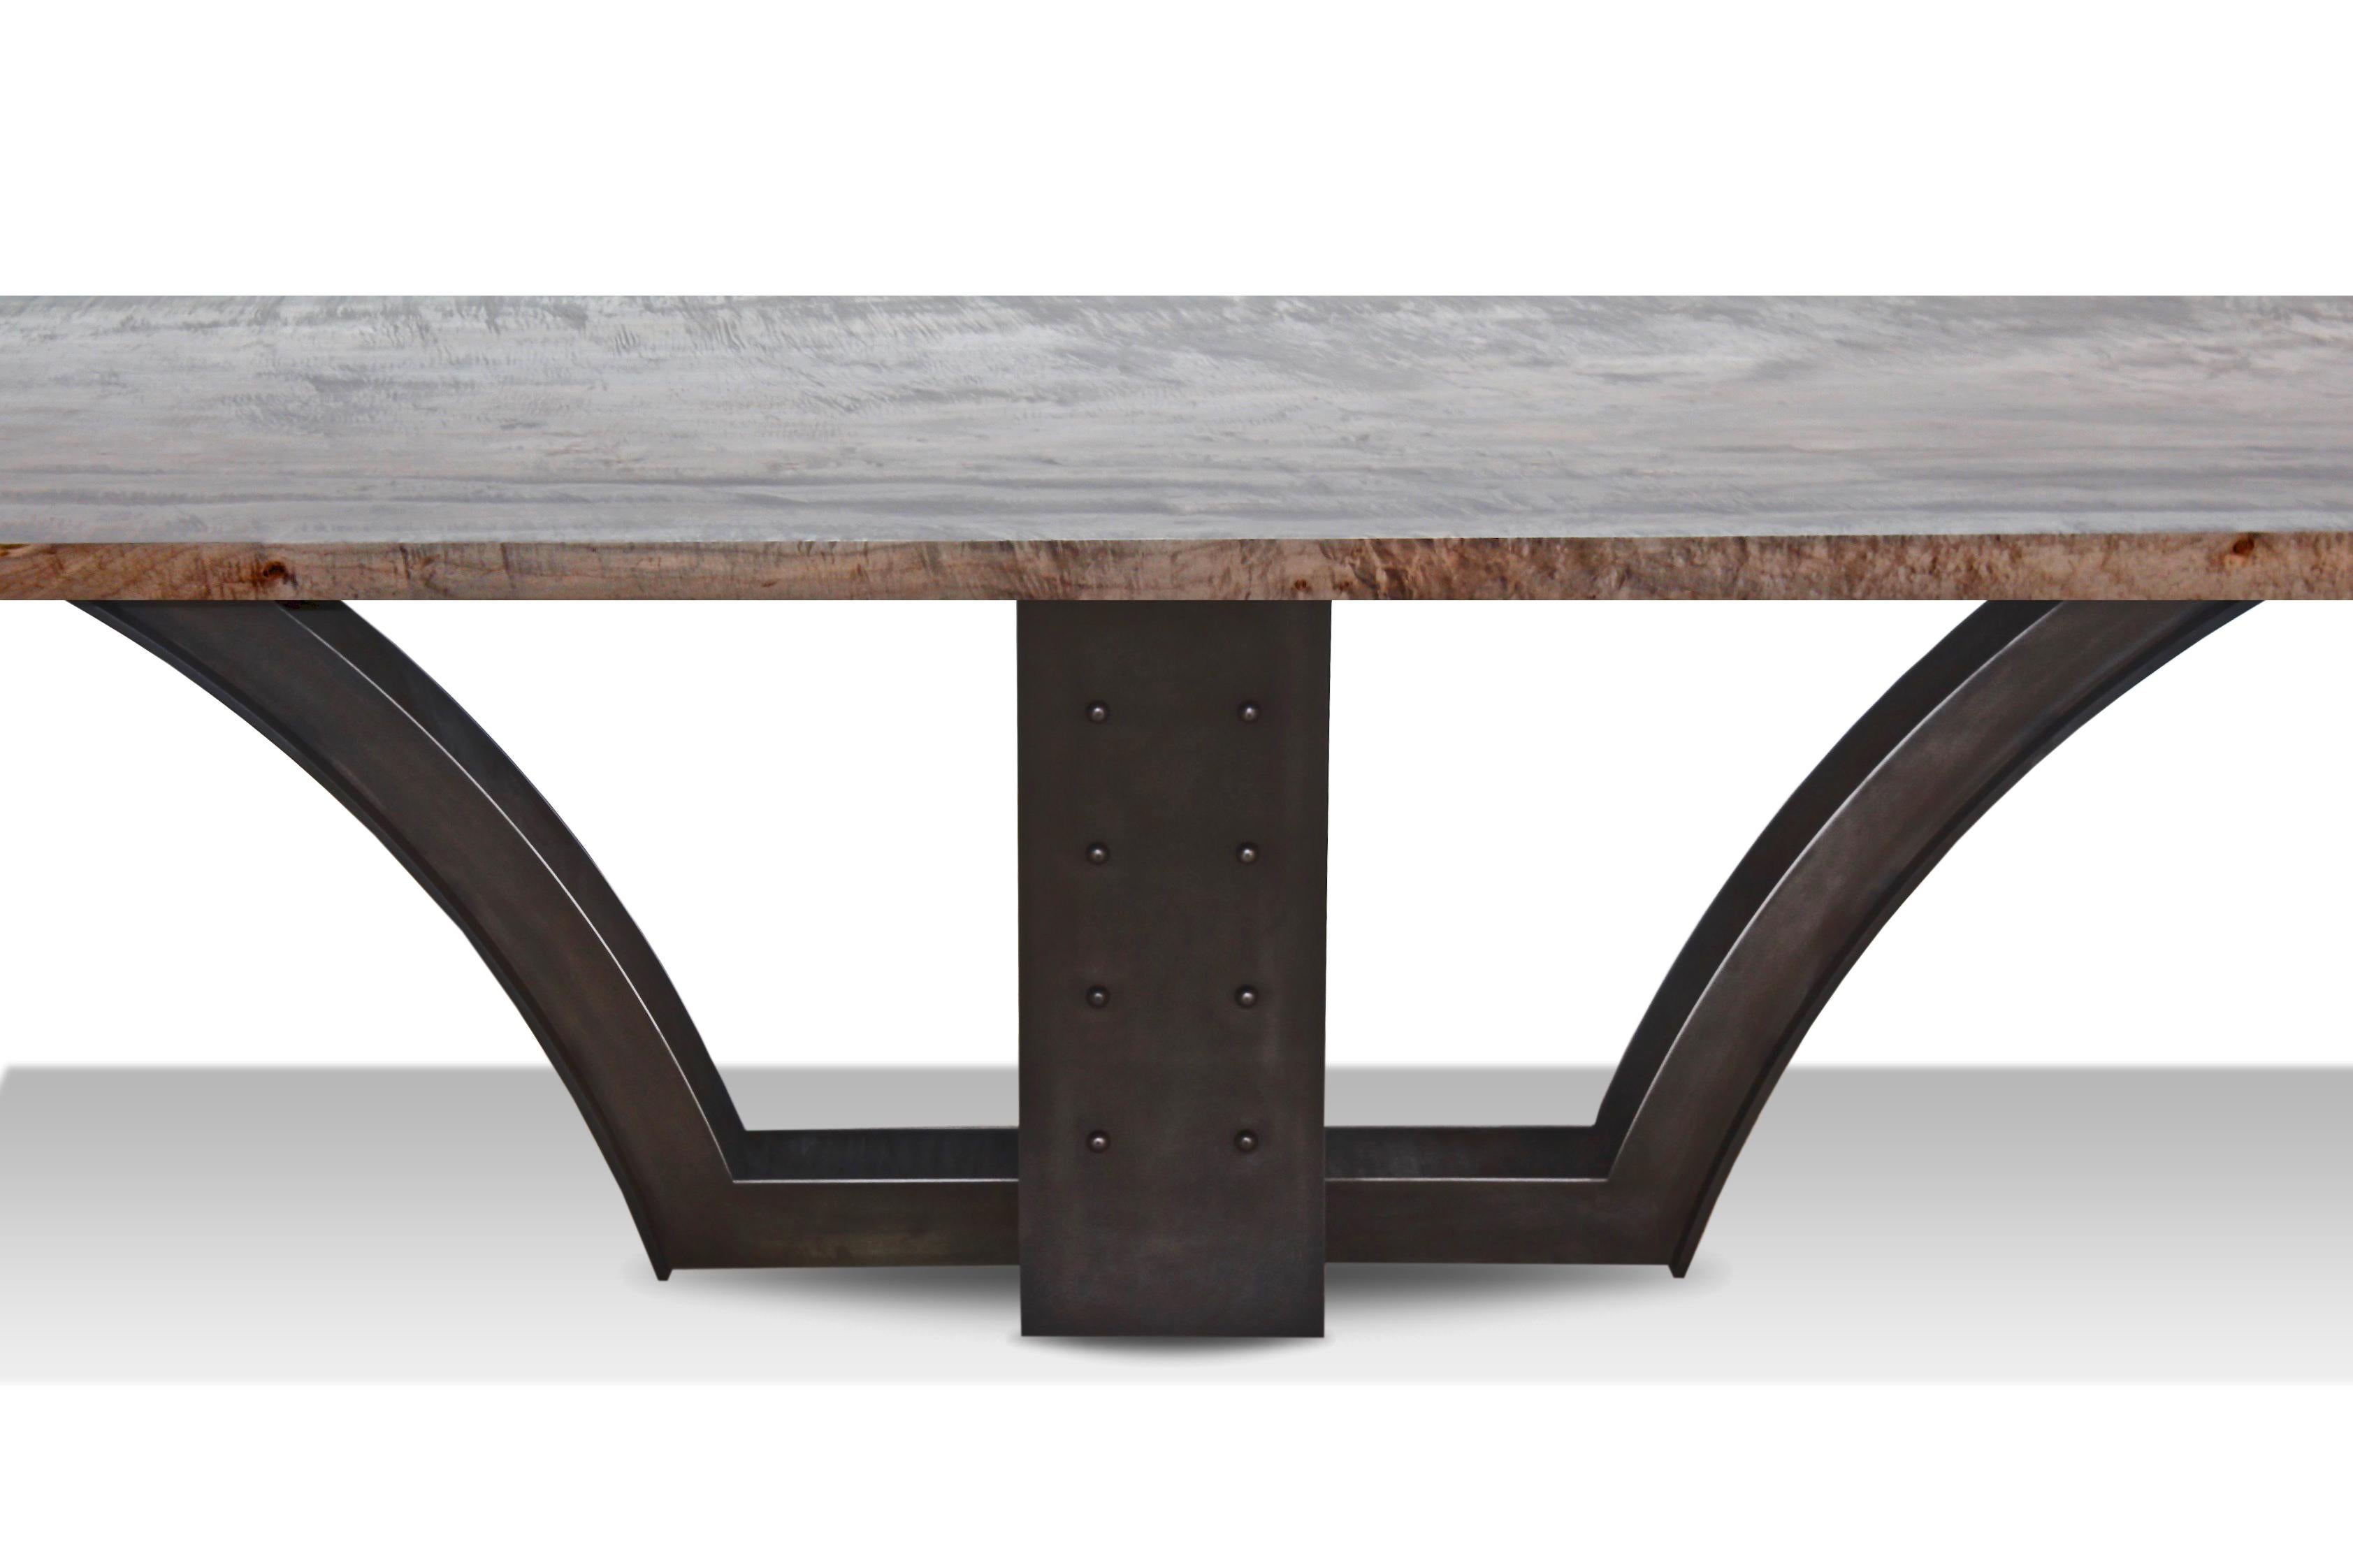 A centrepiece of the Mark Jupiter signature collection, this slab dining table is shown in oxidized maple on our Bridges base - inspired by the classic architecture and bridge design of our home city. 

A wide variety of slabs and finishes are